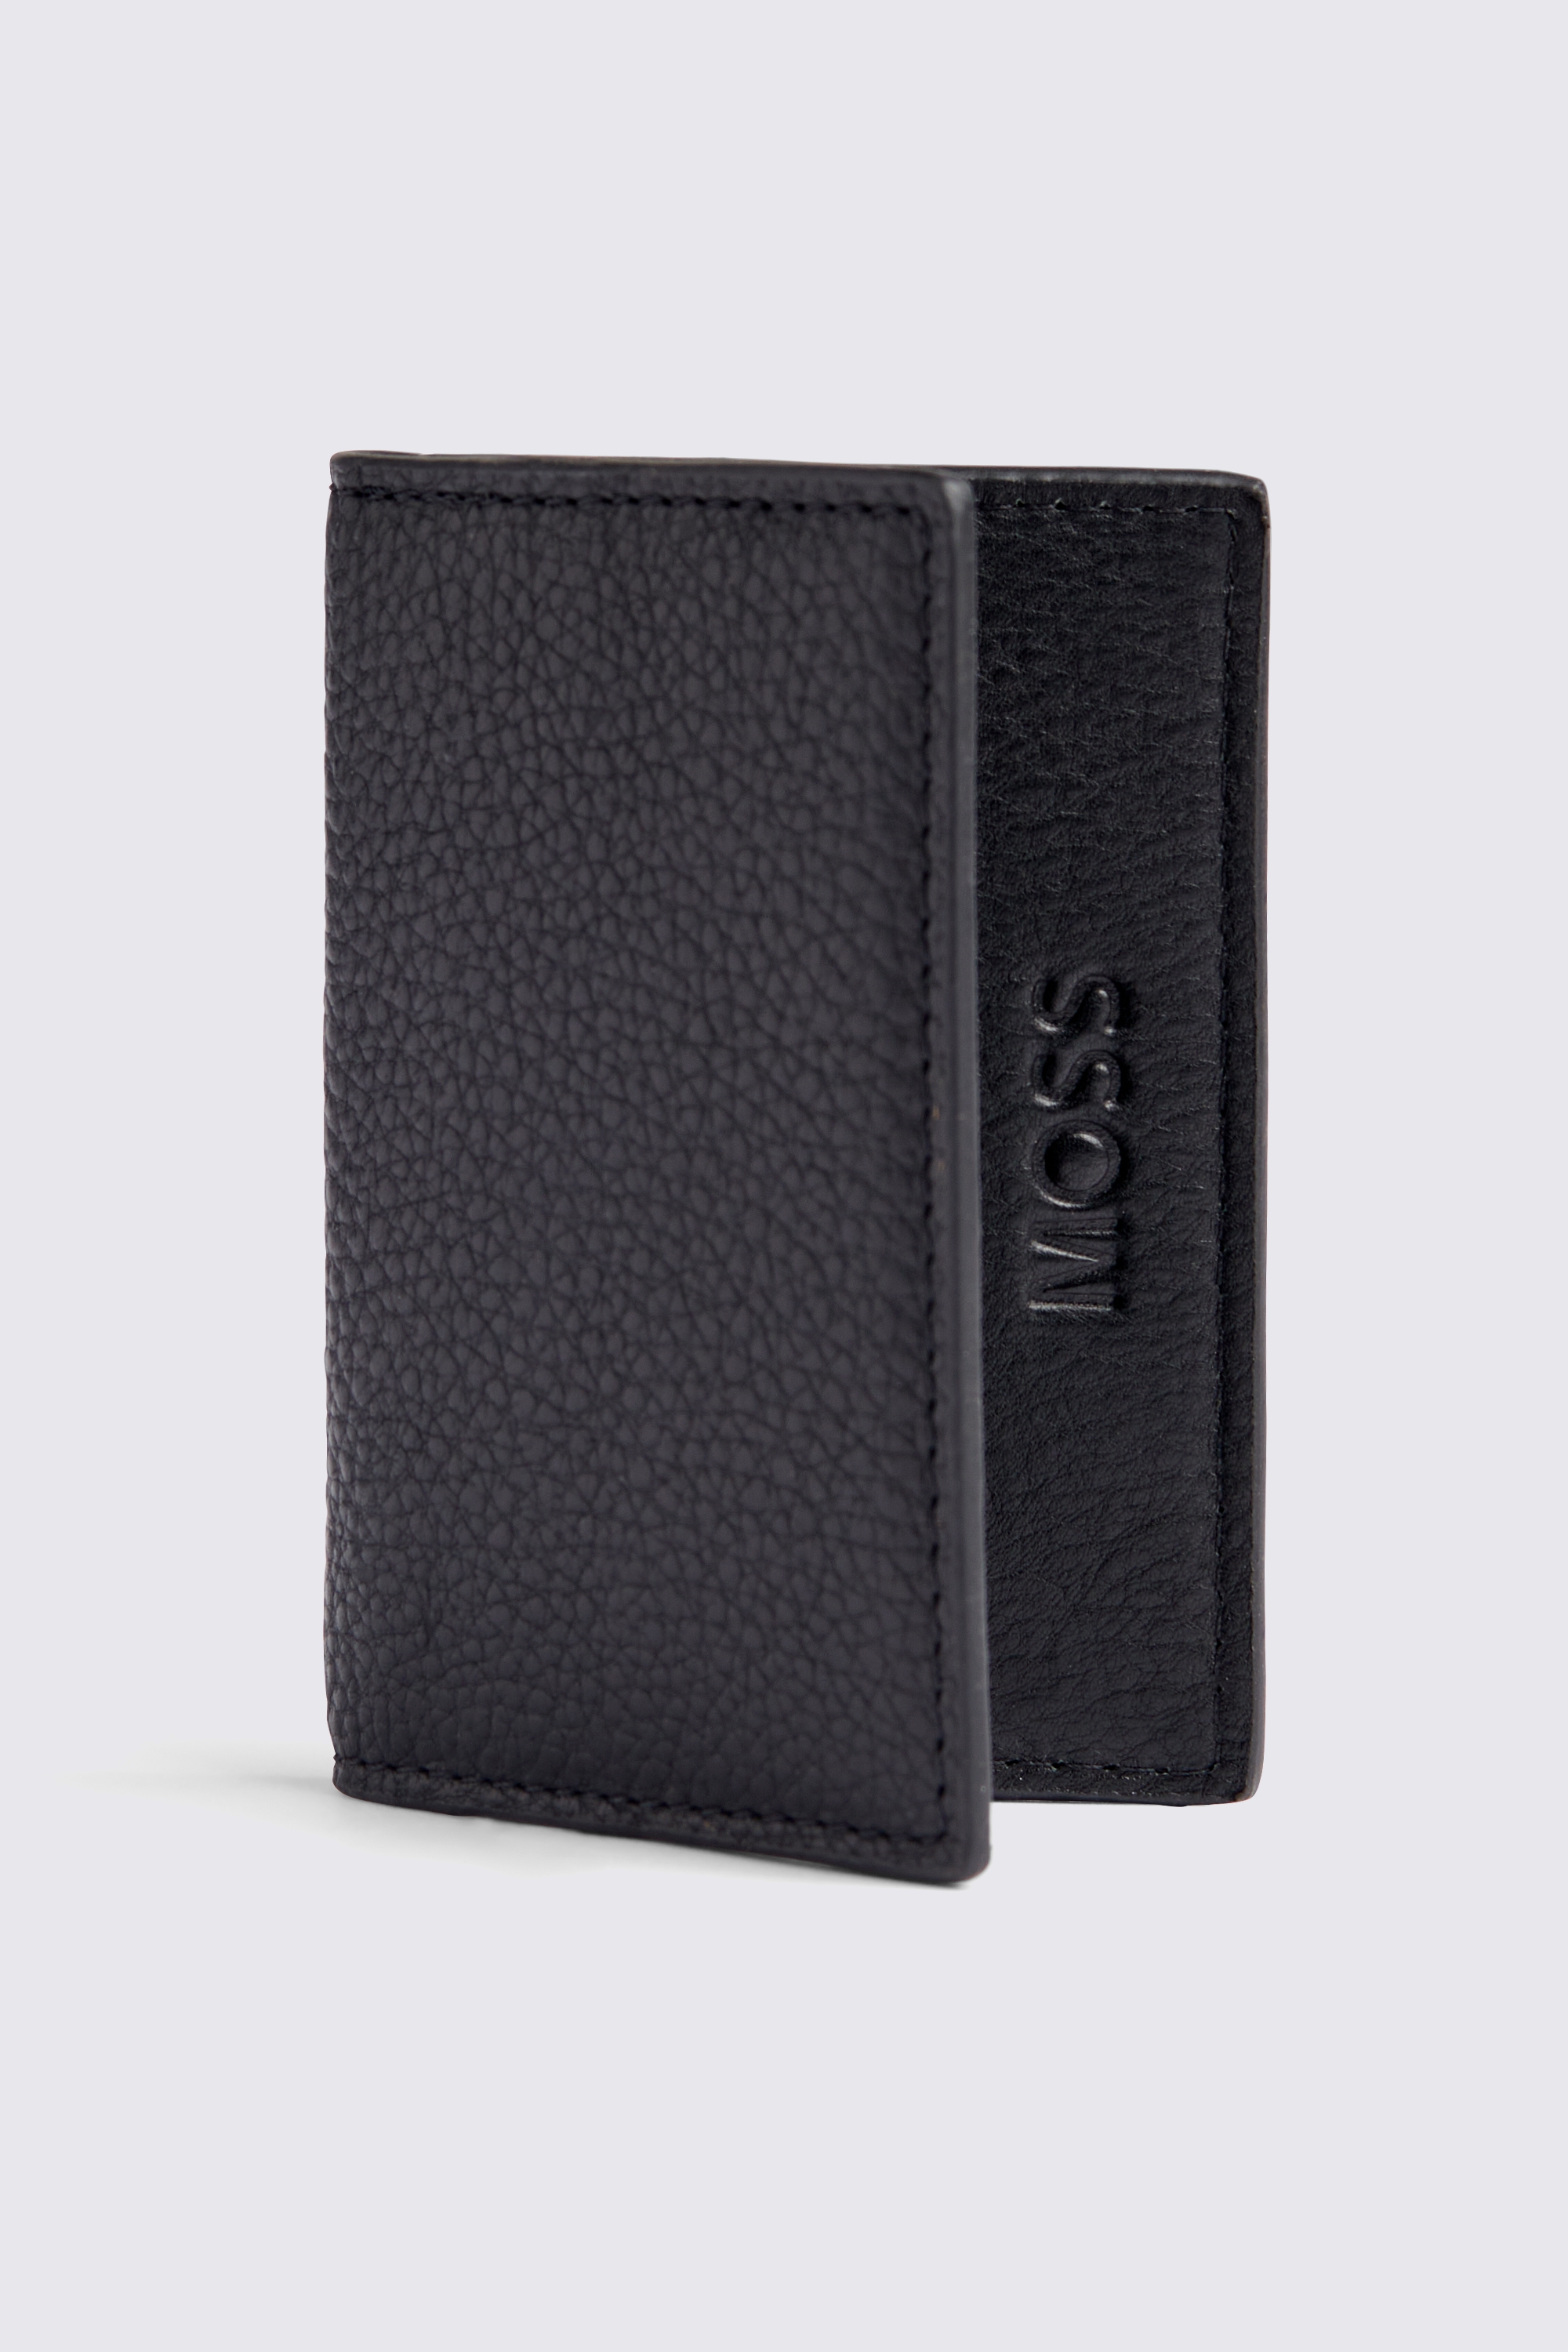 Black Grained Leather Billfold | Buy Online at Moss